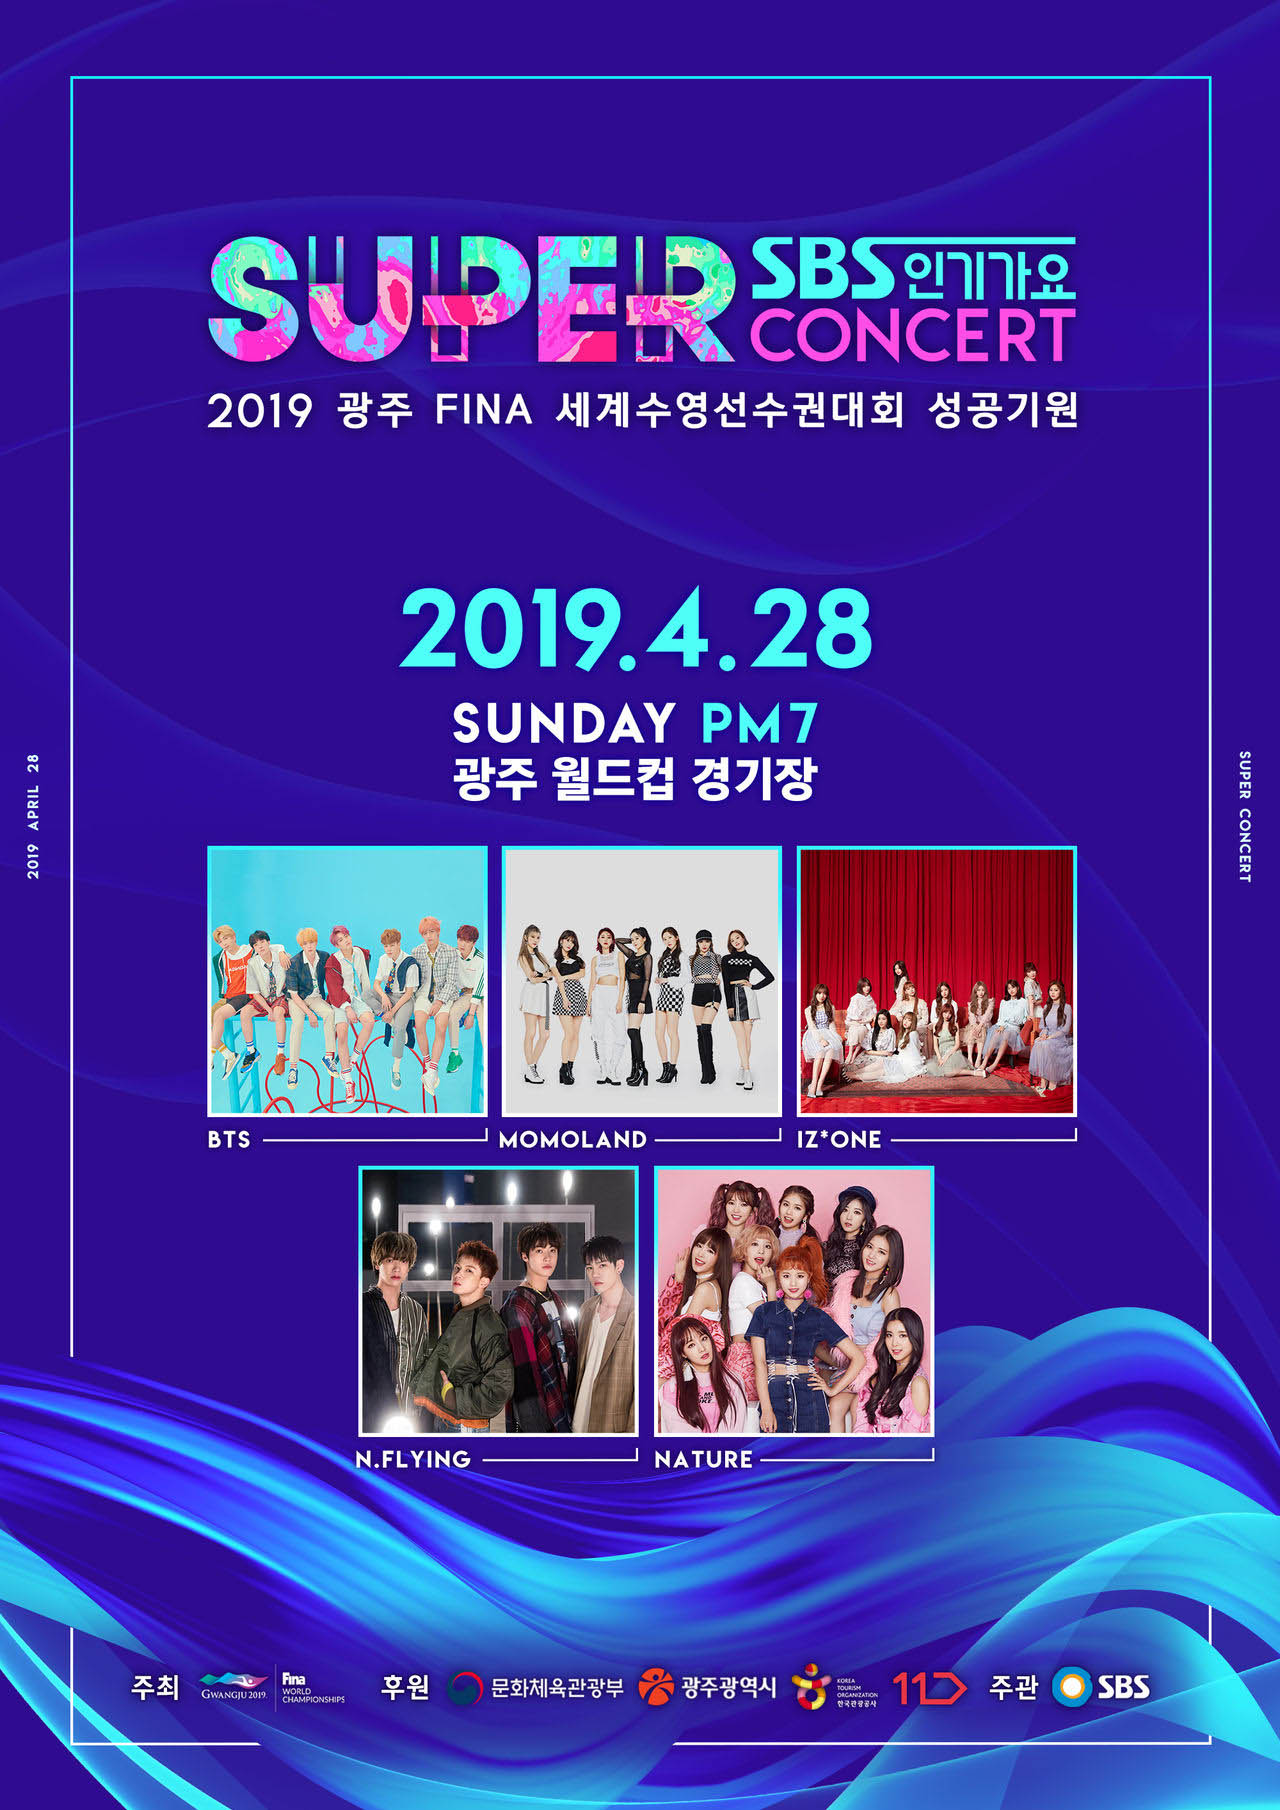 KTO to attract 10,000 foreign tourists to SBS Inkigayo 2019 Super Concert